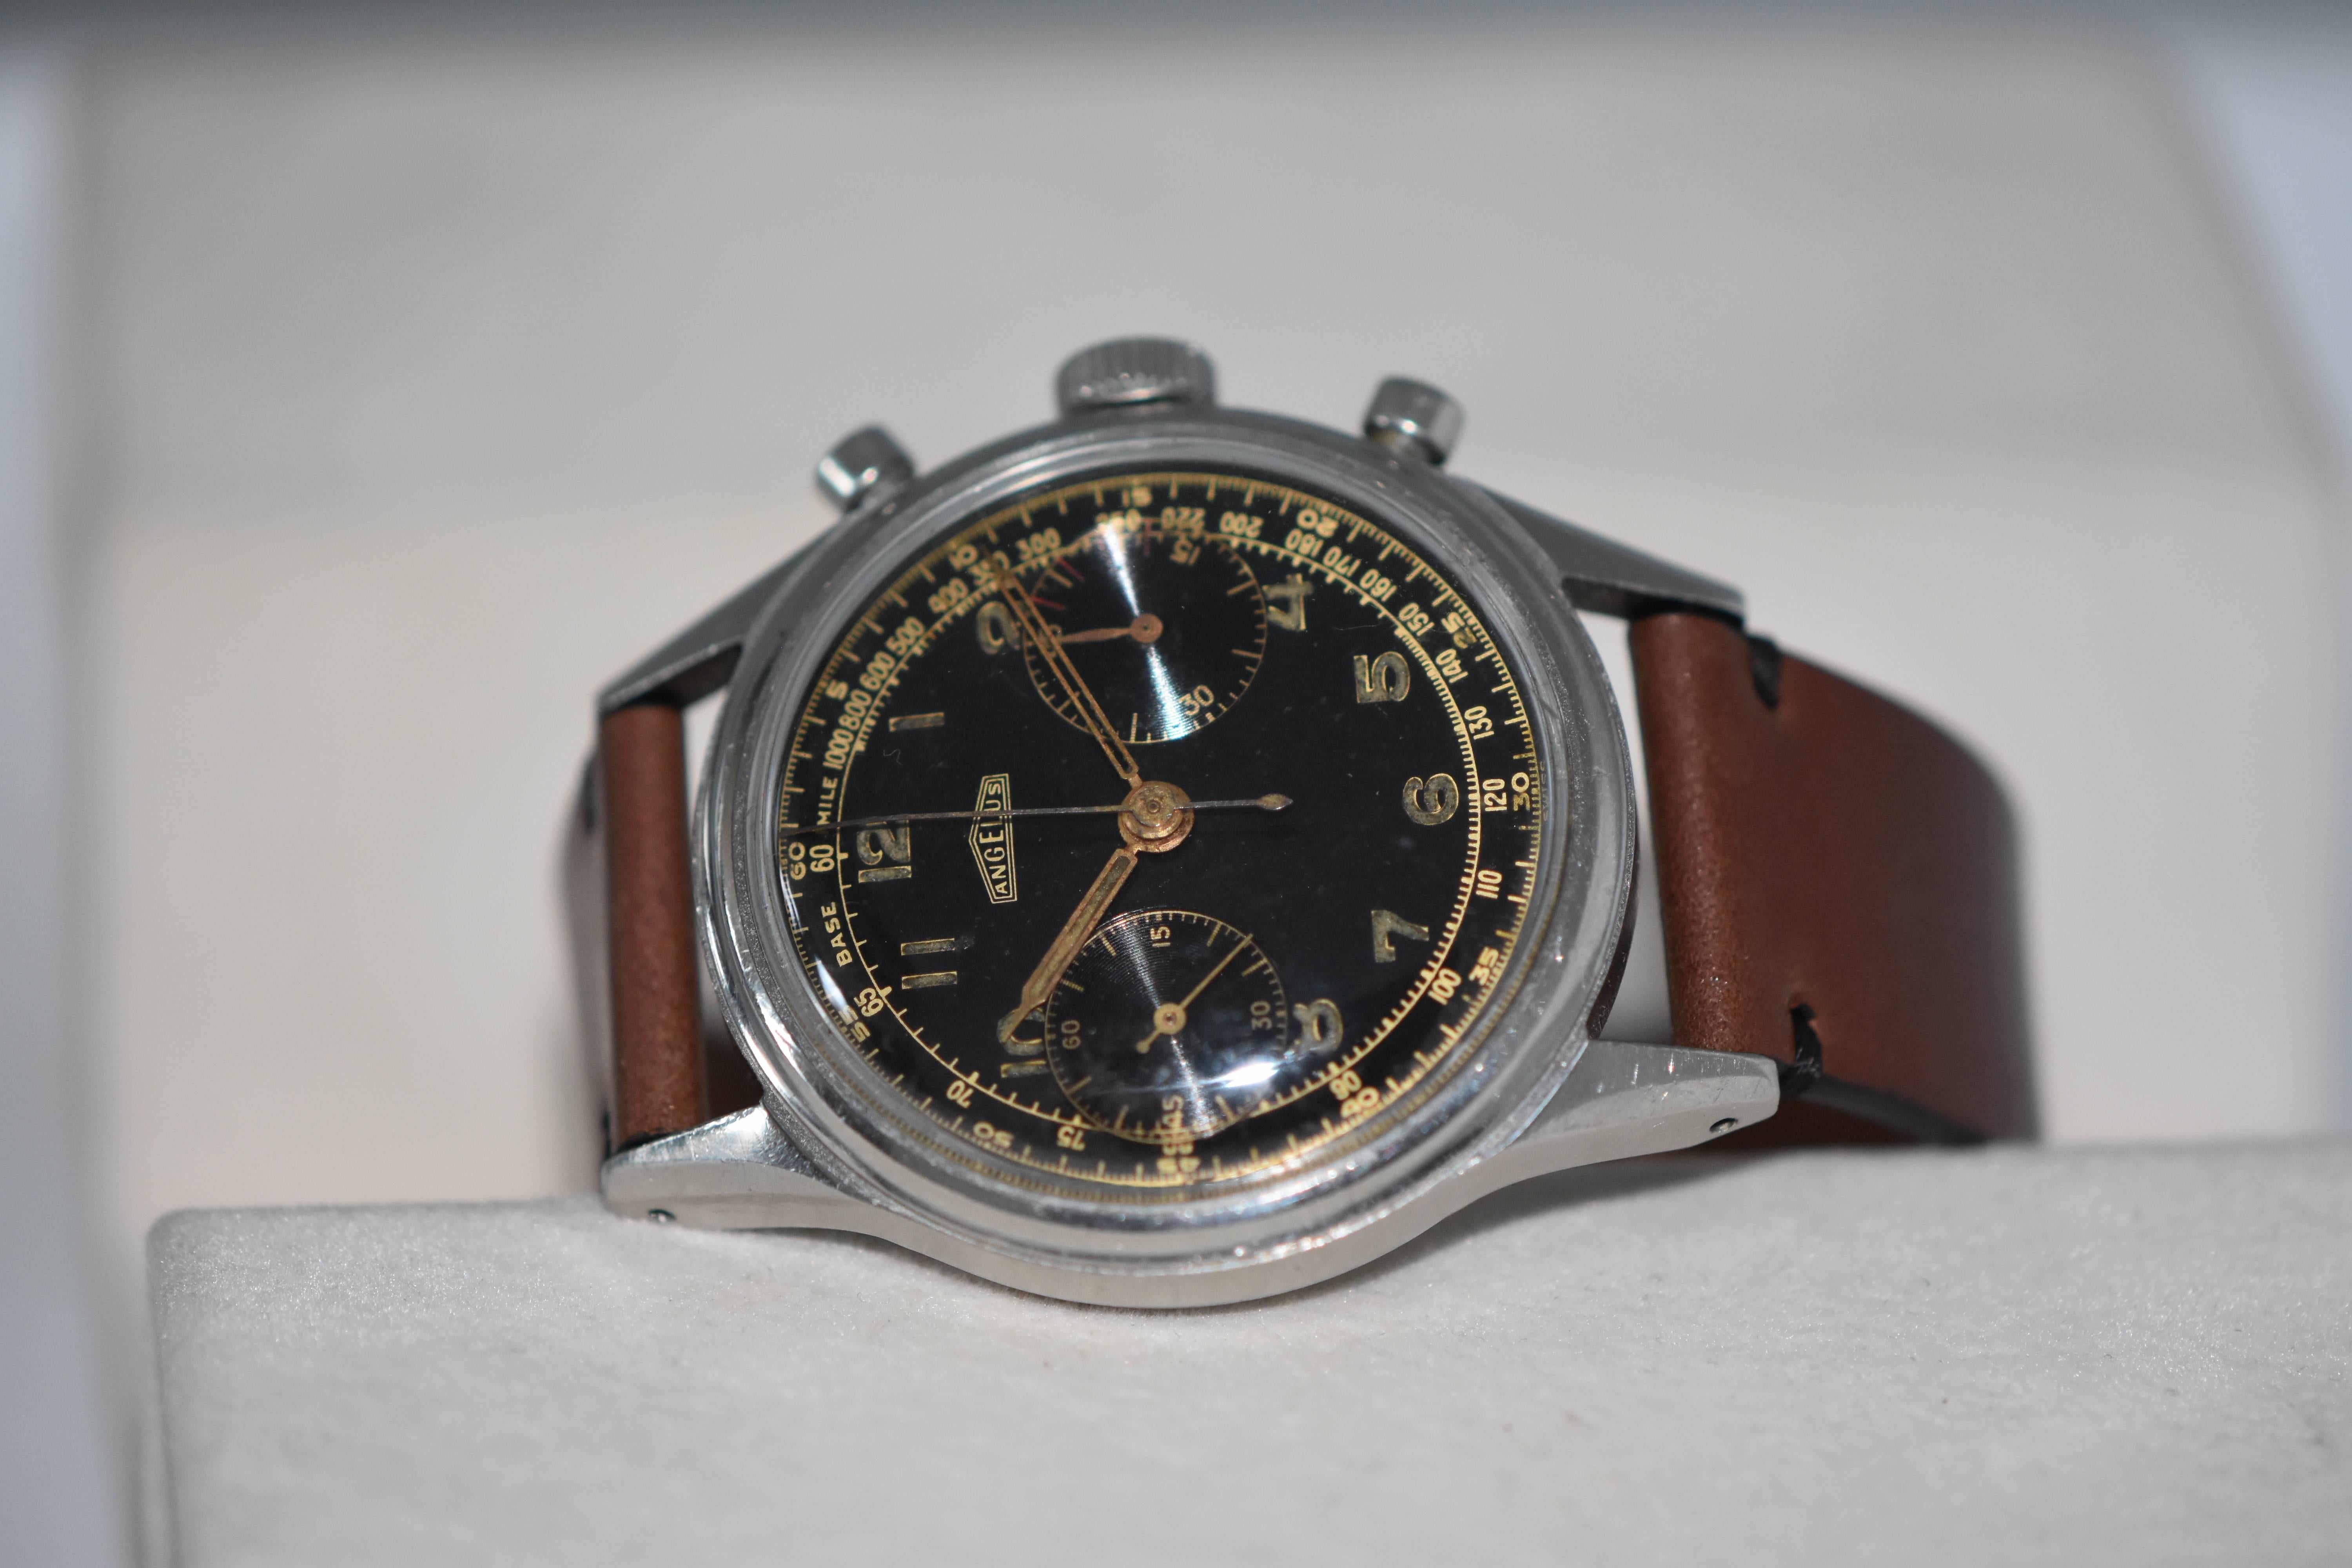 Model: Angelus Caliber 215 Chronograph

Circa: 1950 

Movement: Angelus Caliber 215

Case: Stainless steel 37mm diameter, 13mm thick, with screw down case back. Case and crystal show some minor signs of wear, understandable for its age.